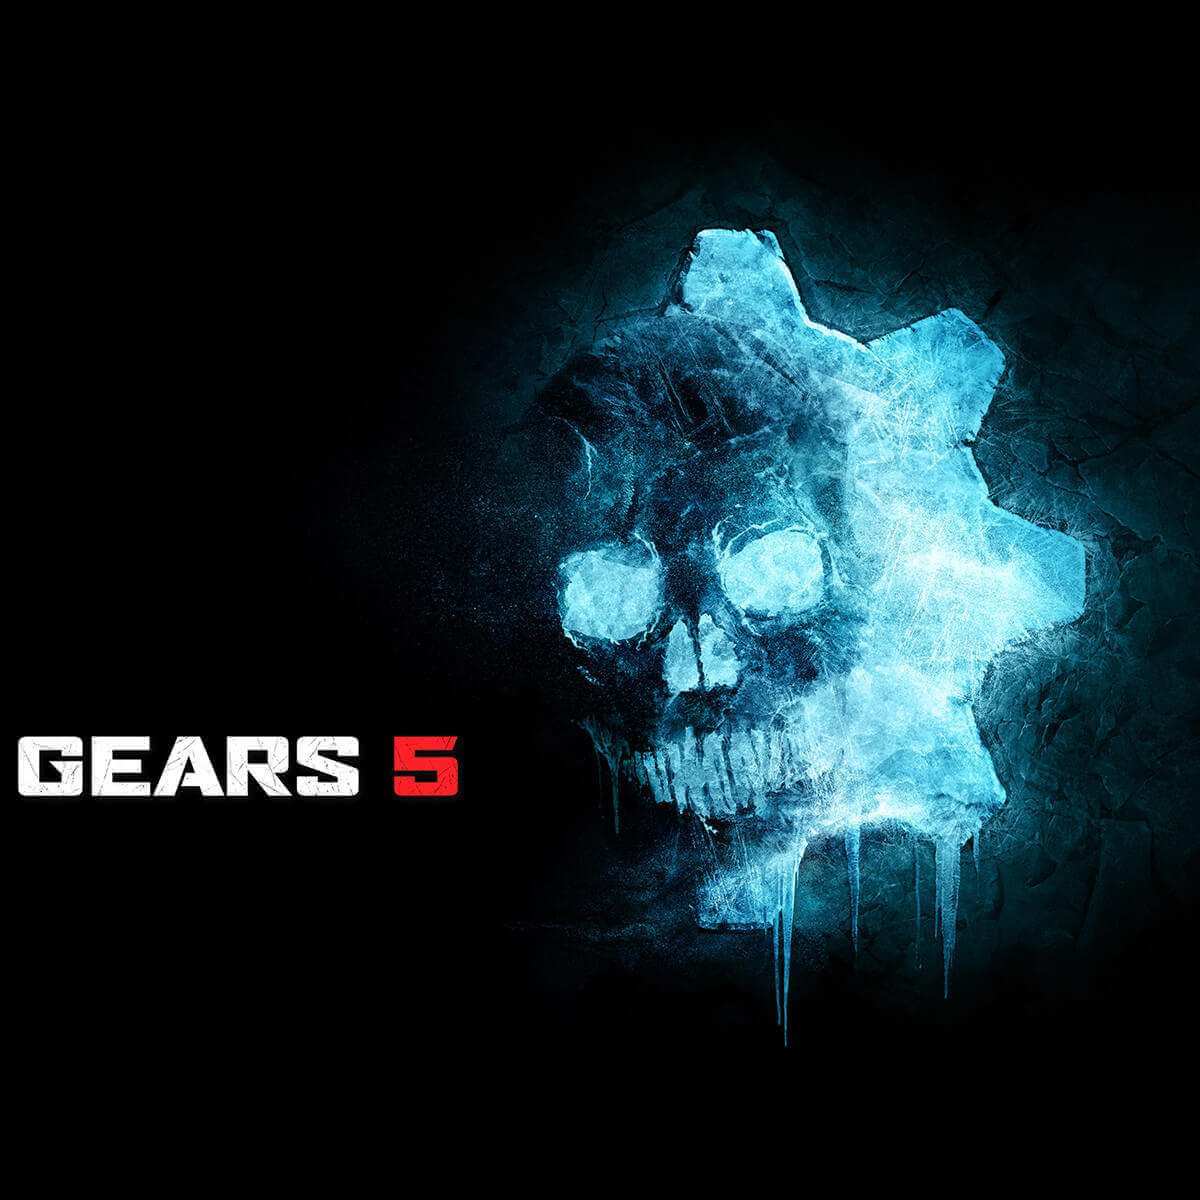 gears 5: what the best gaming experience PC or Xbox?